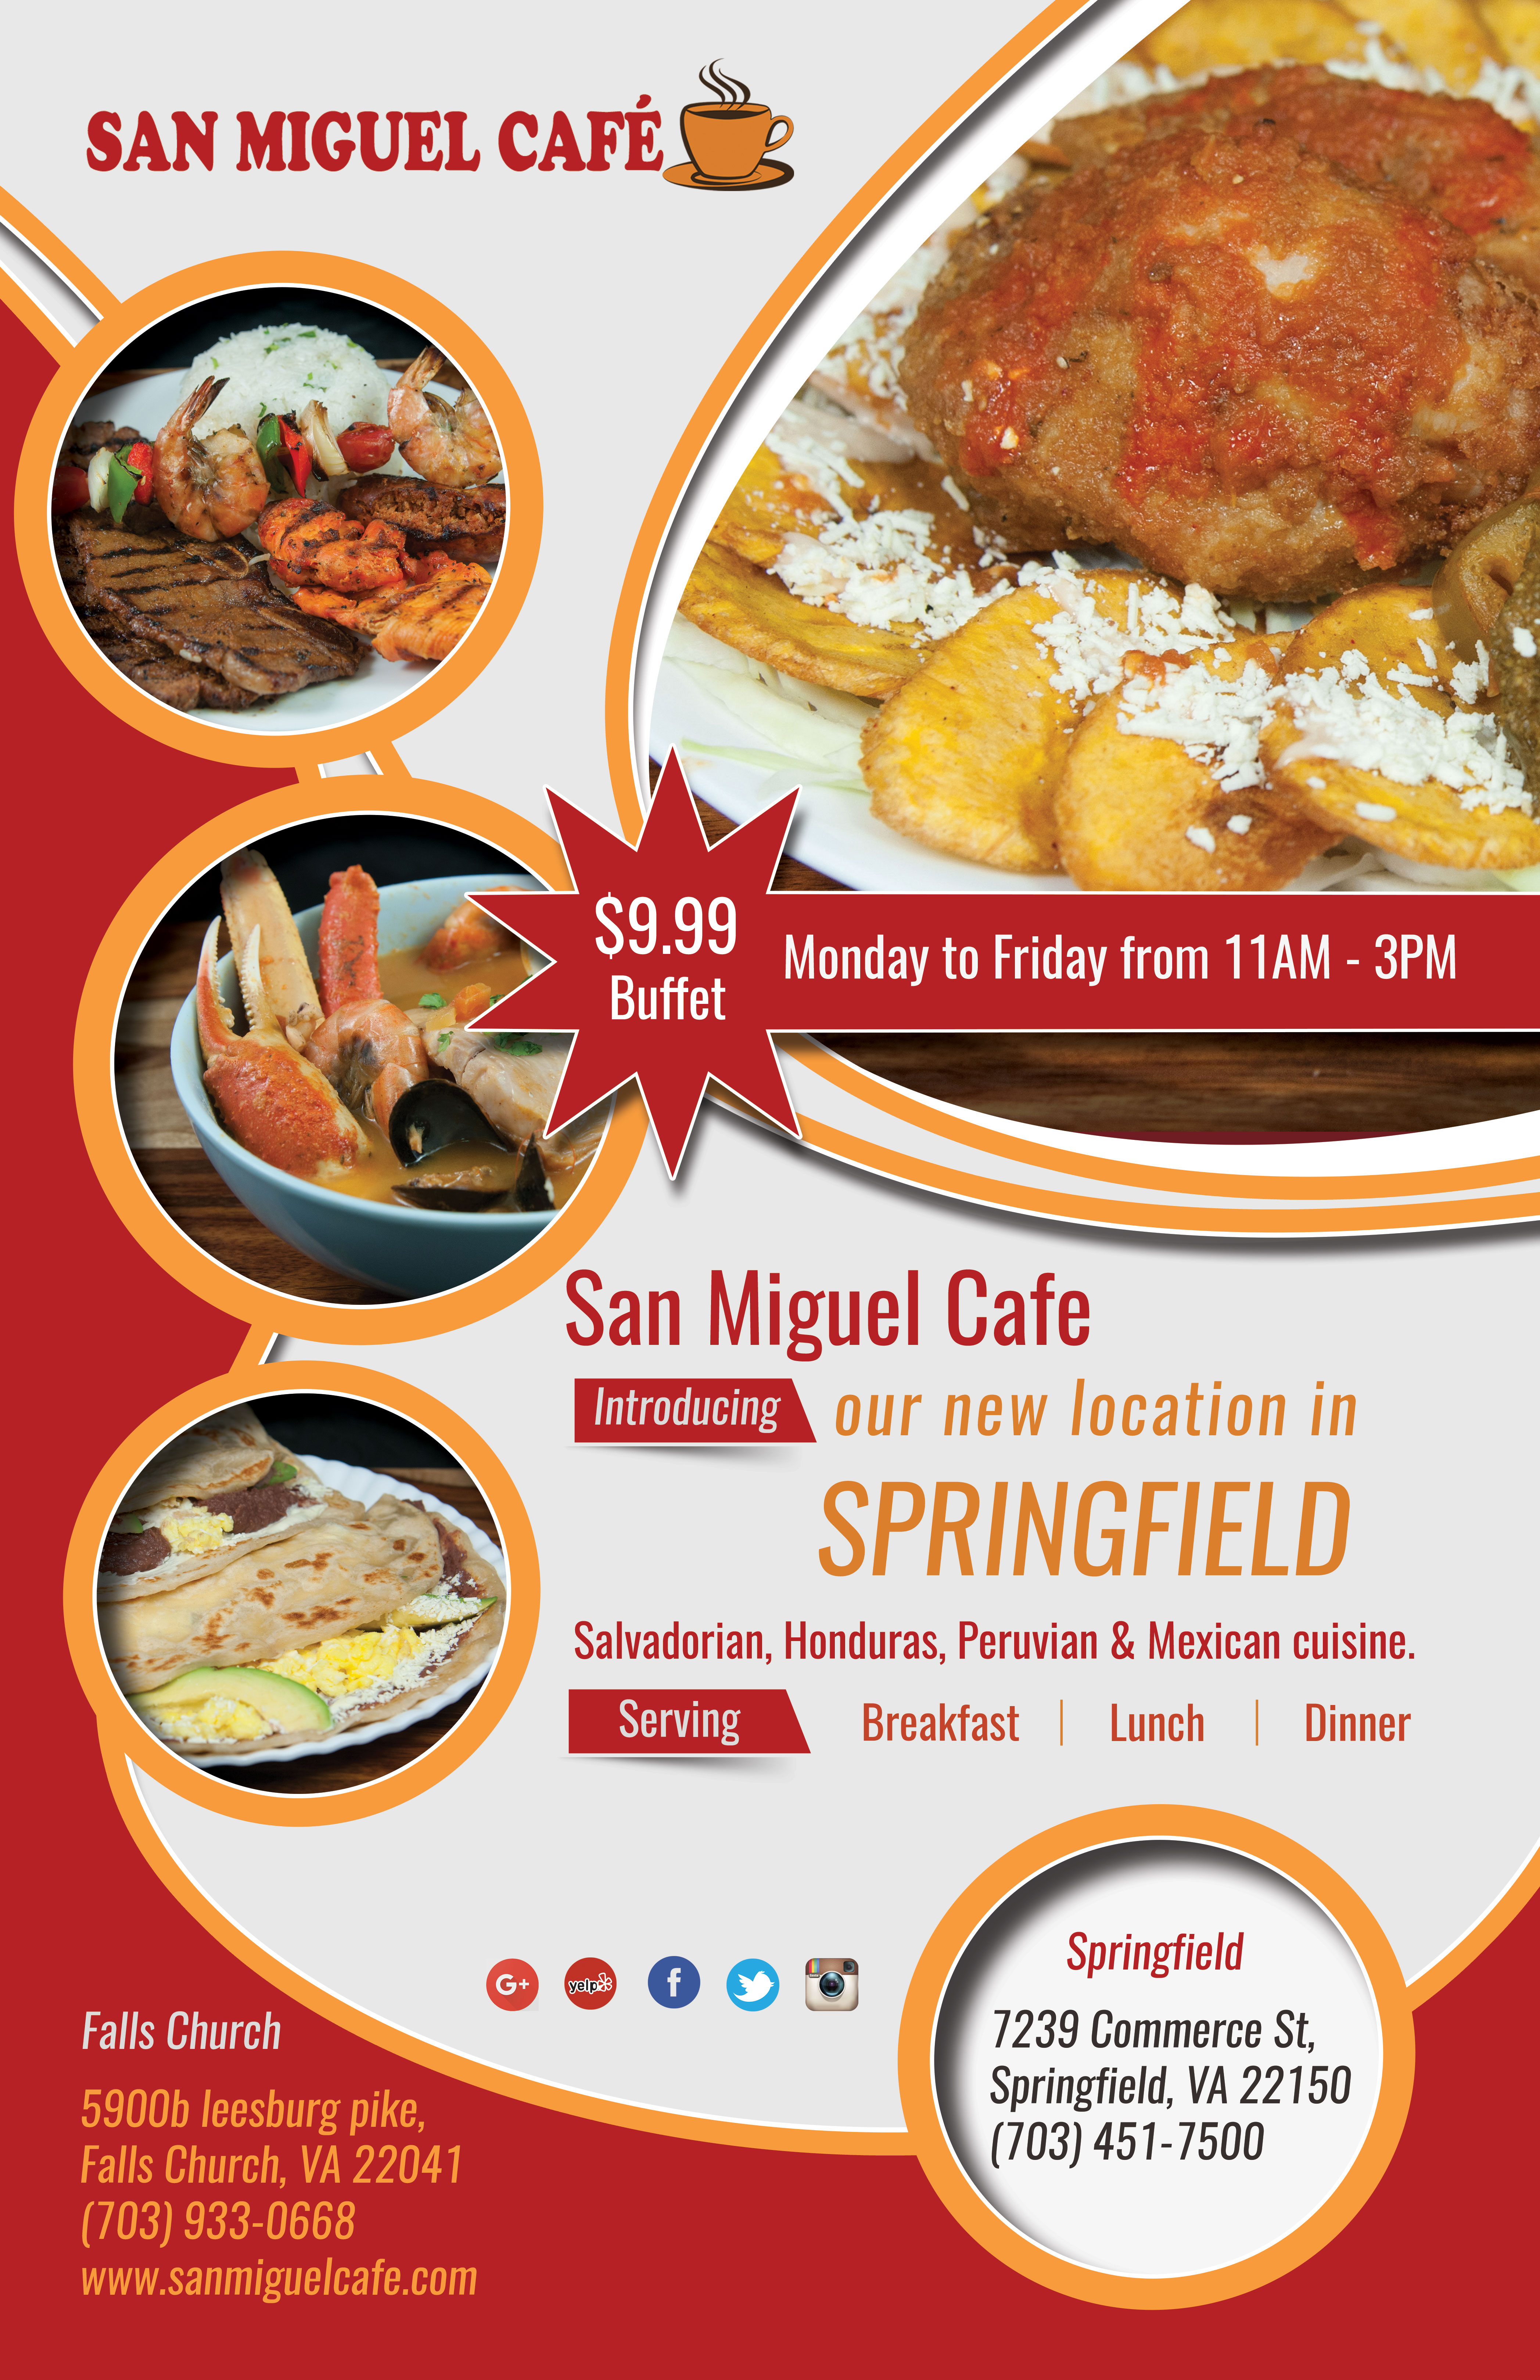 http://www.sanmiguelcafe.com/wp-content/uploads/2016/12/San-Miguel-English.jpg